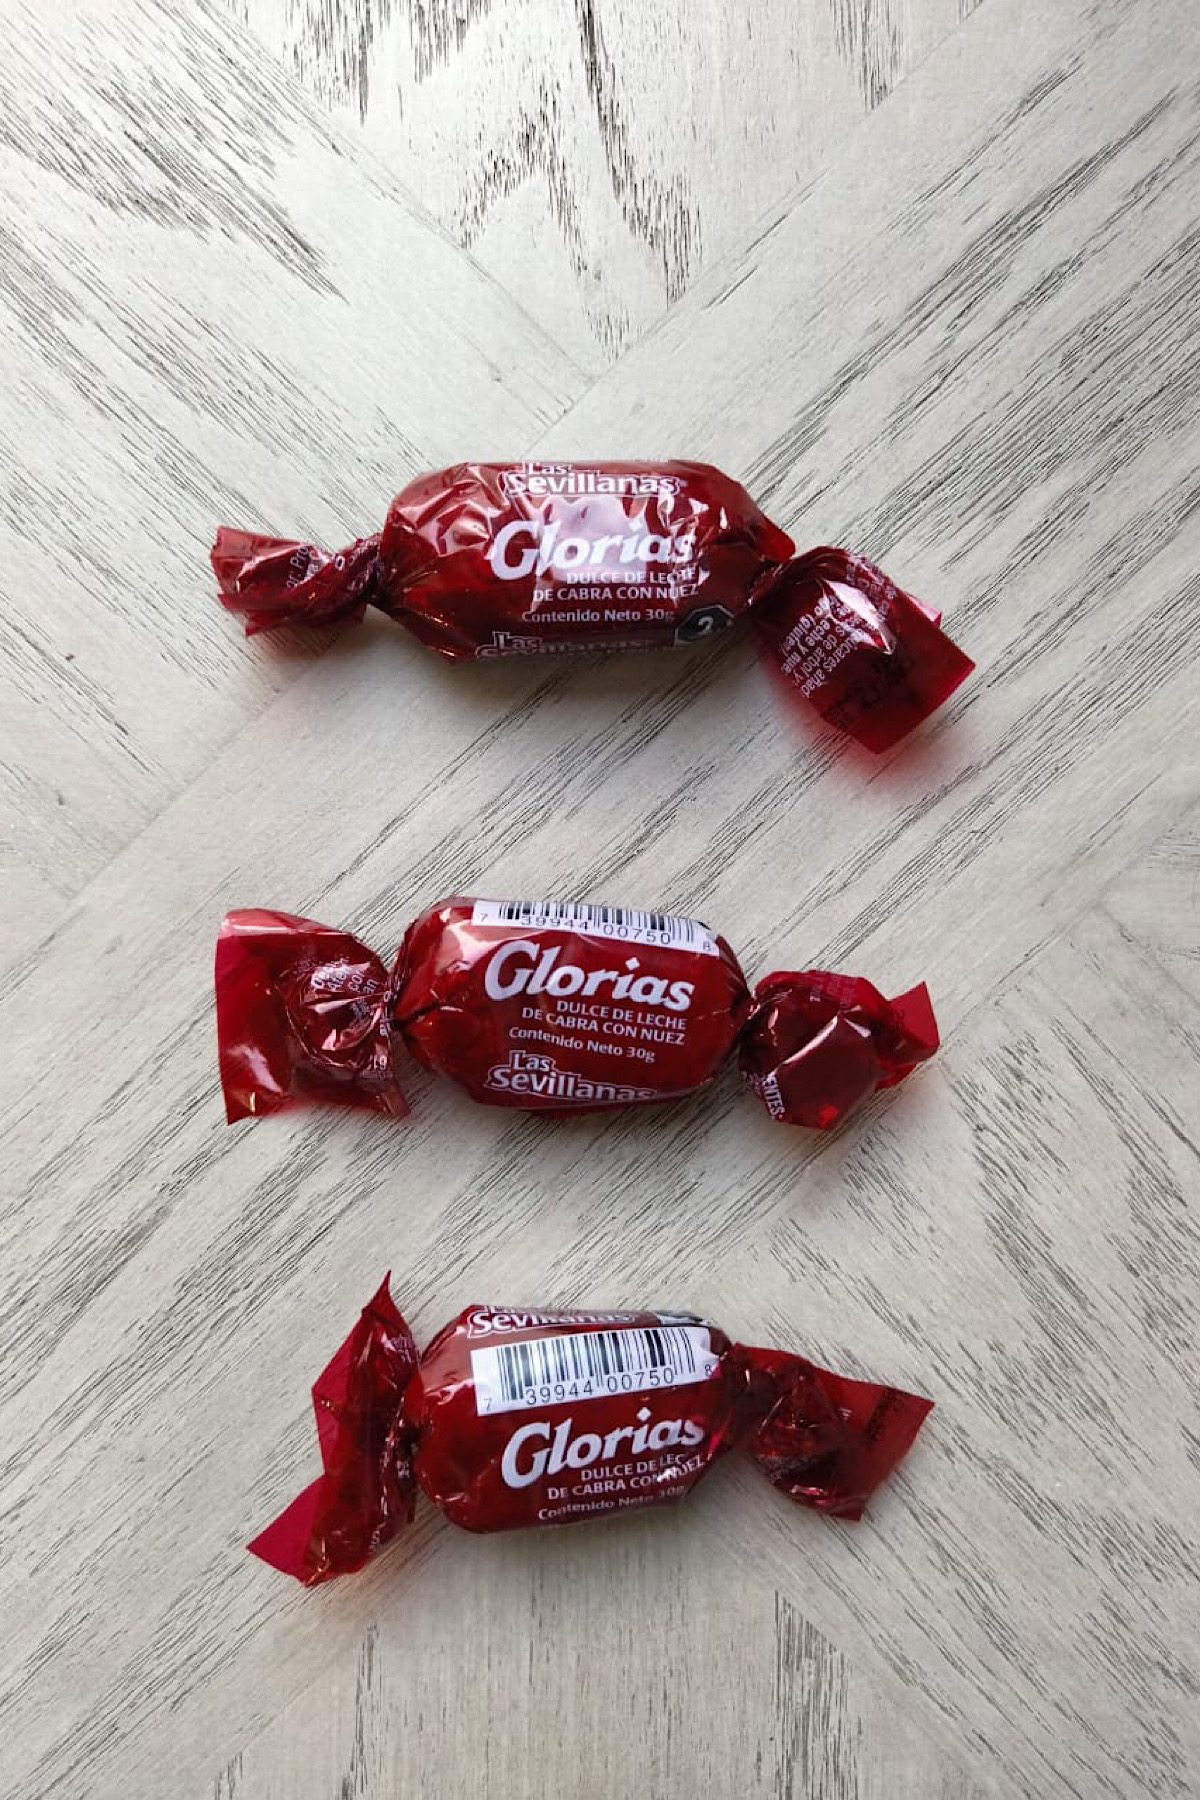 Glorias: The Best Mexican Candy